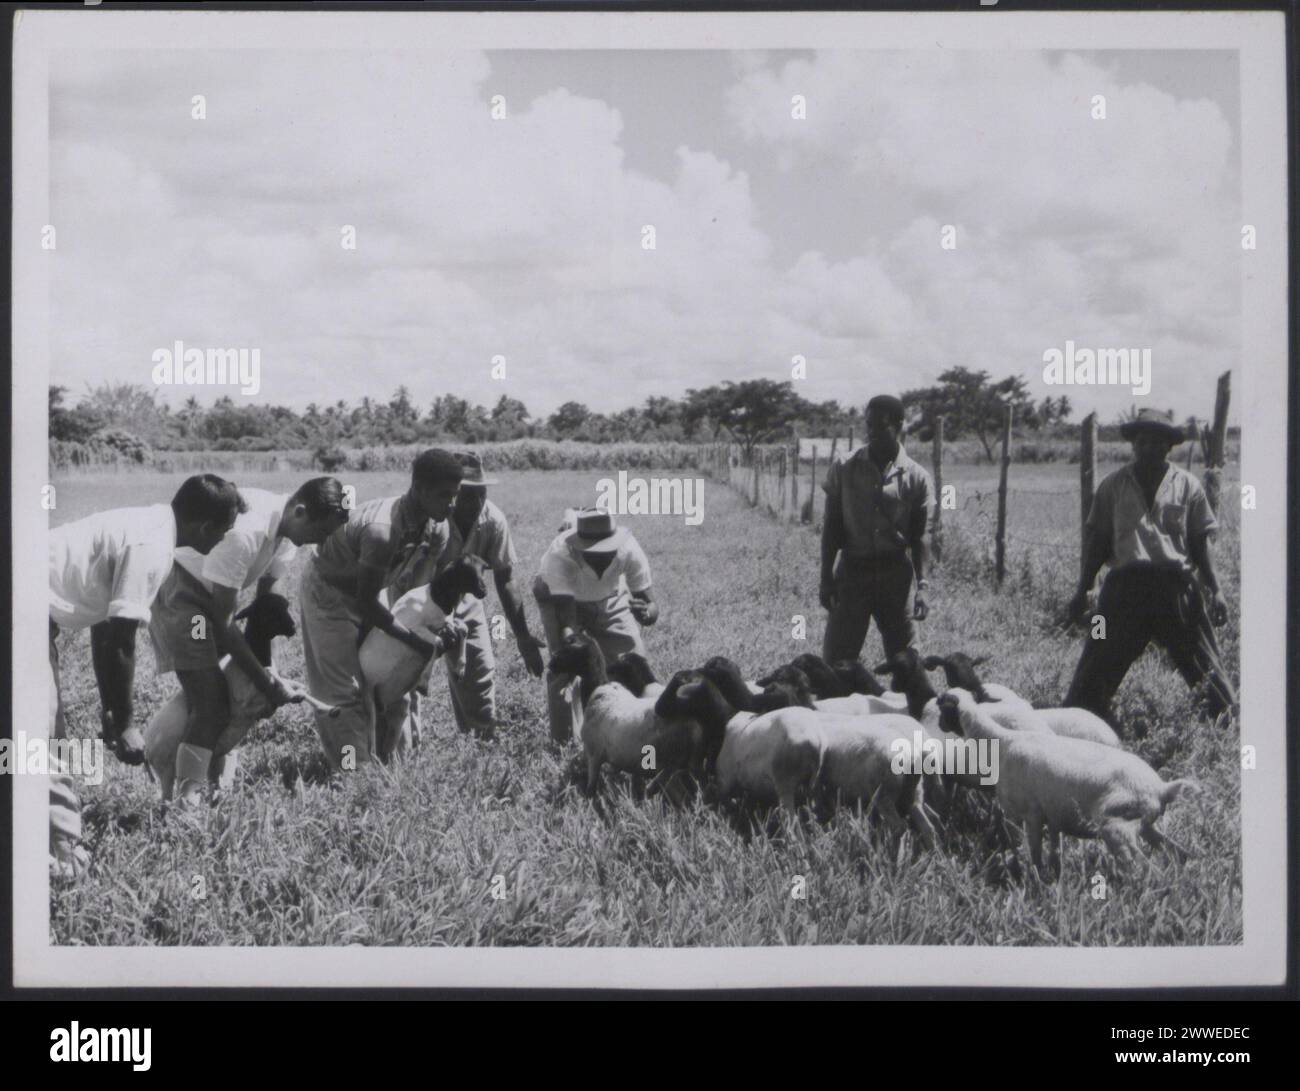 Description: Trinidad and Tobago. 'Blackhead Persian sheep being examined by agricultural students of the University College of the West Indies'. Photograph No.: D 107490. Official Trinidad and Tobago photograph compiled by Central Office of Information. Publicity statement on reverse. Location: Trinidad and Tobago Date: 1961 Apr caribbean, caribbeanthroughalens Stock Photo